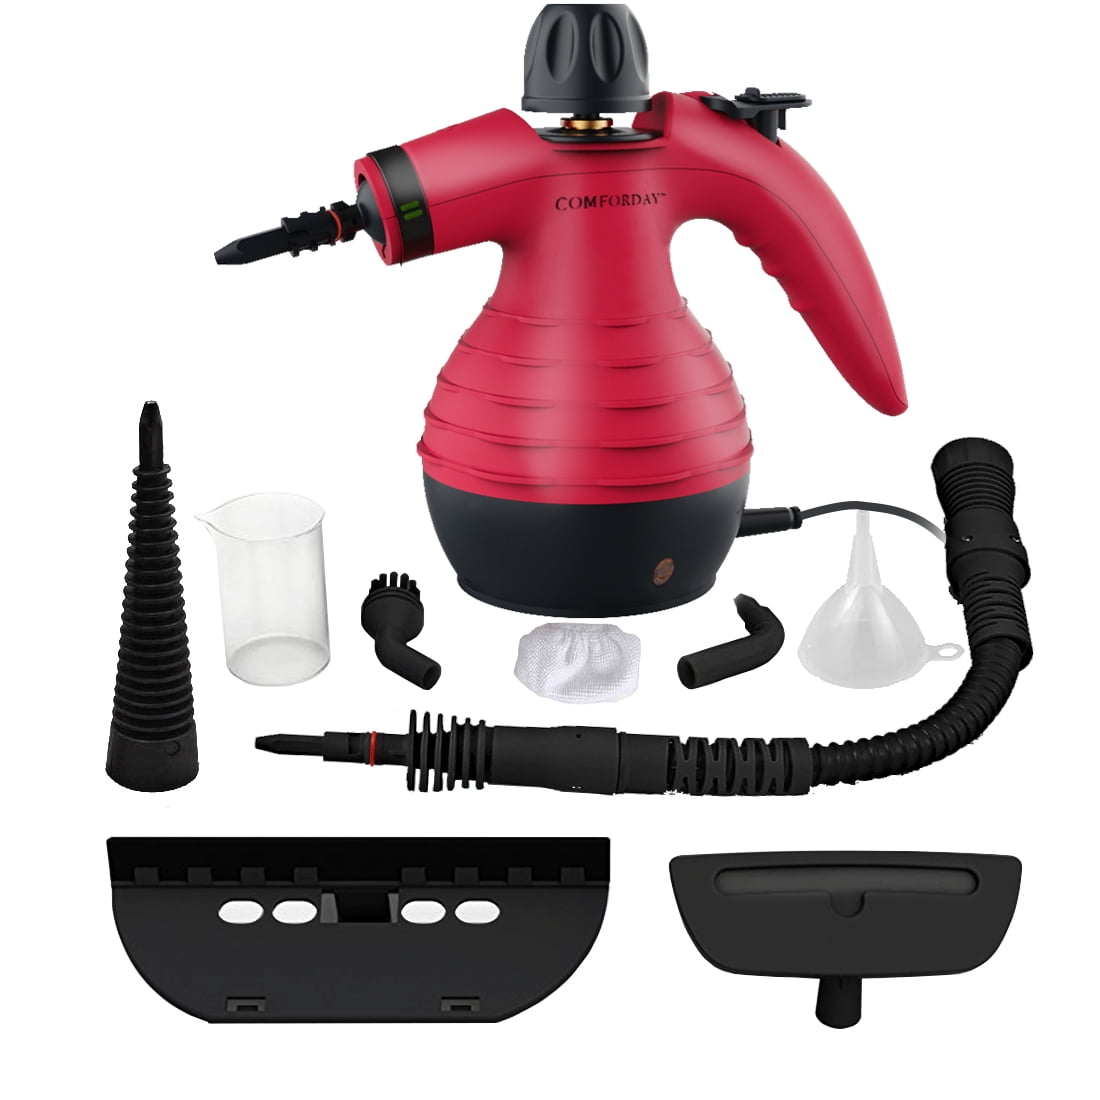 Details about   Car Steam Cleaner Machine Handheld Multi Purpose Upholstery Carpet Cleaning US 